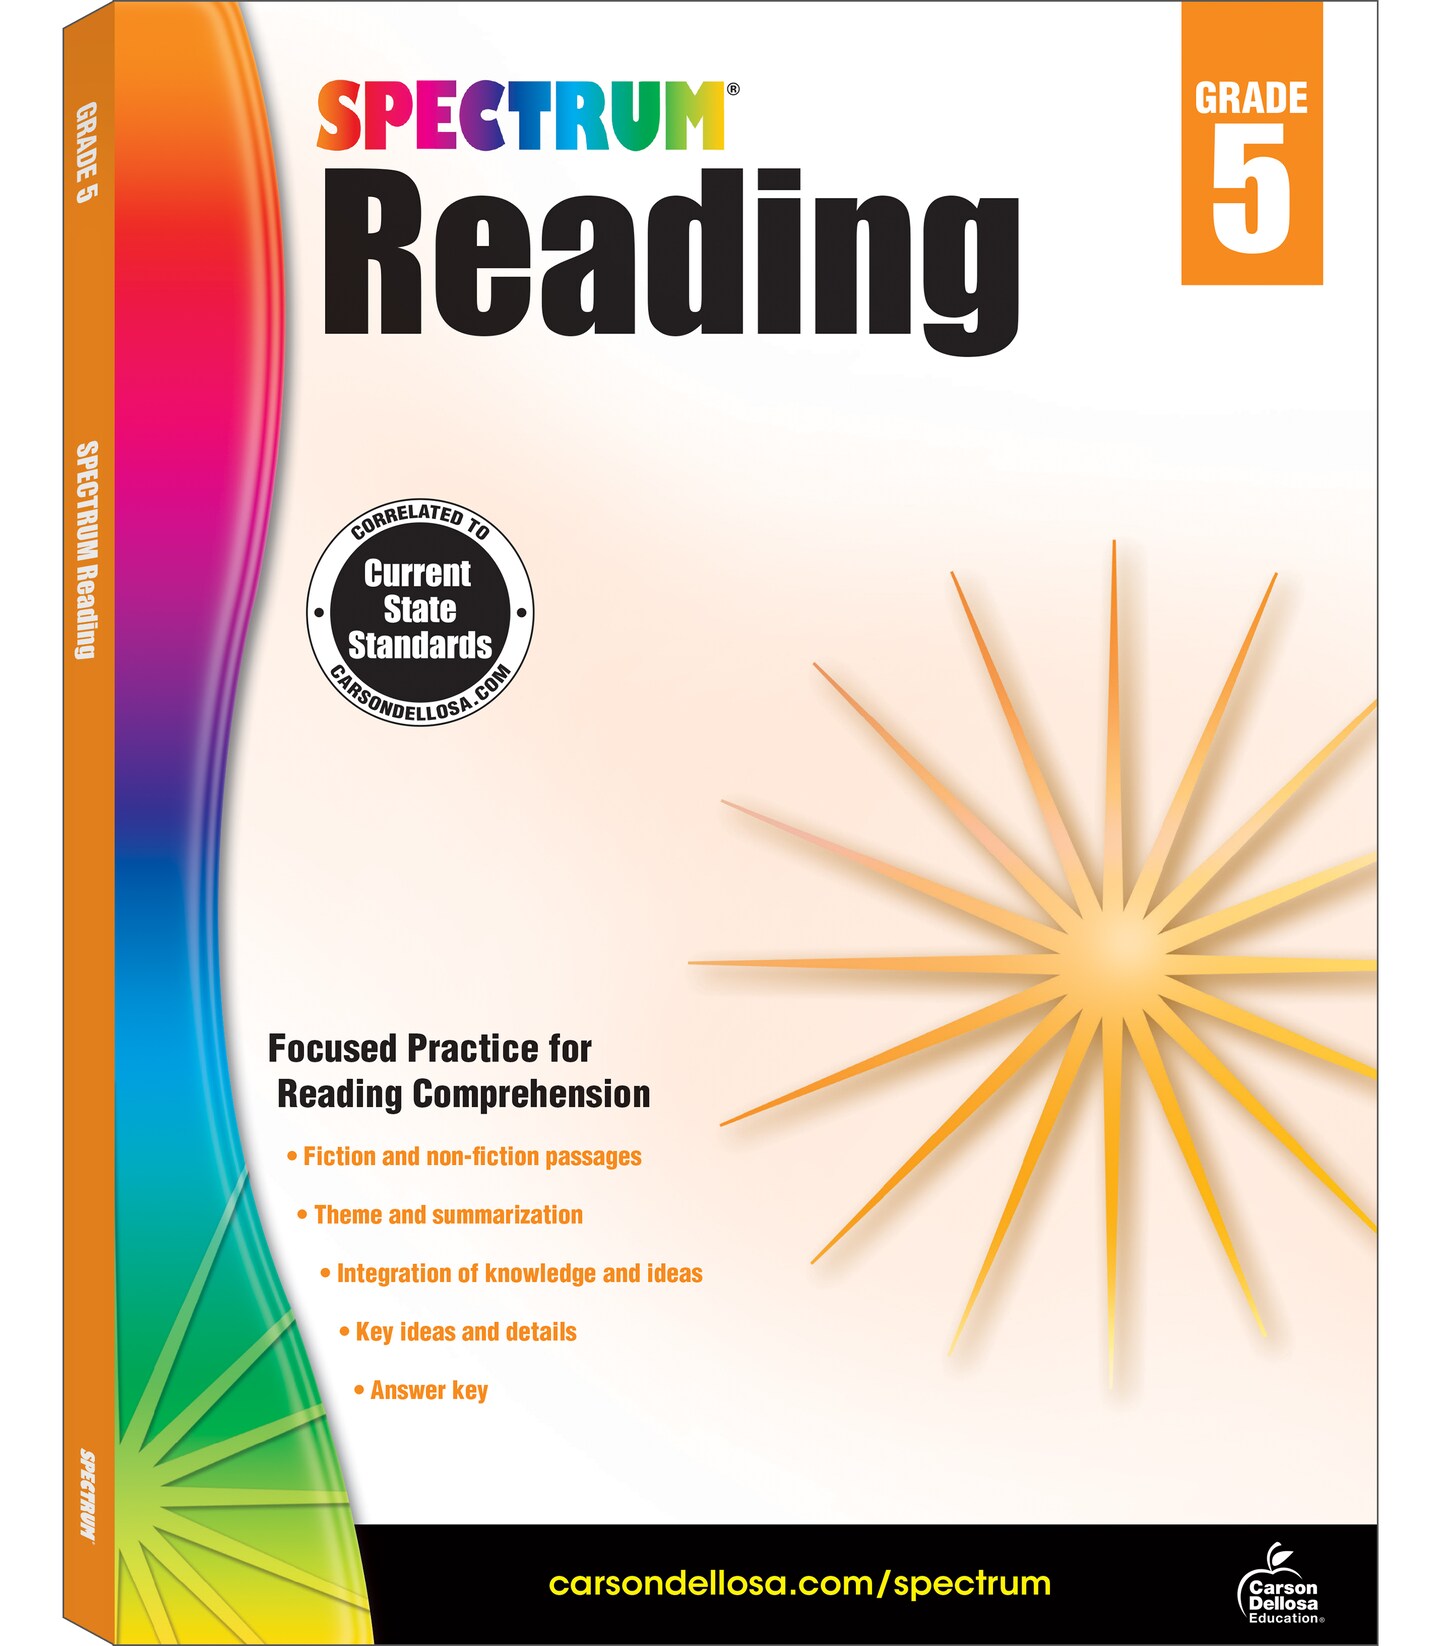 Spectrum Reading Comprehension Grade 5 Workbooks, Ages 10 to 11, 5th Grade Reading Comprehension, Nonfiction and Fiction Passages, Summarizing Stories and Identifying Themes - 174 Pages